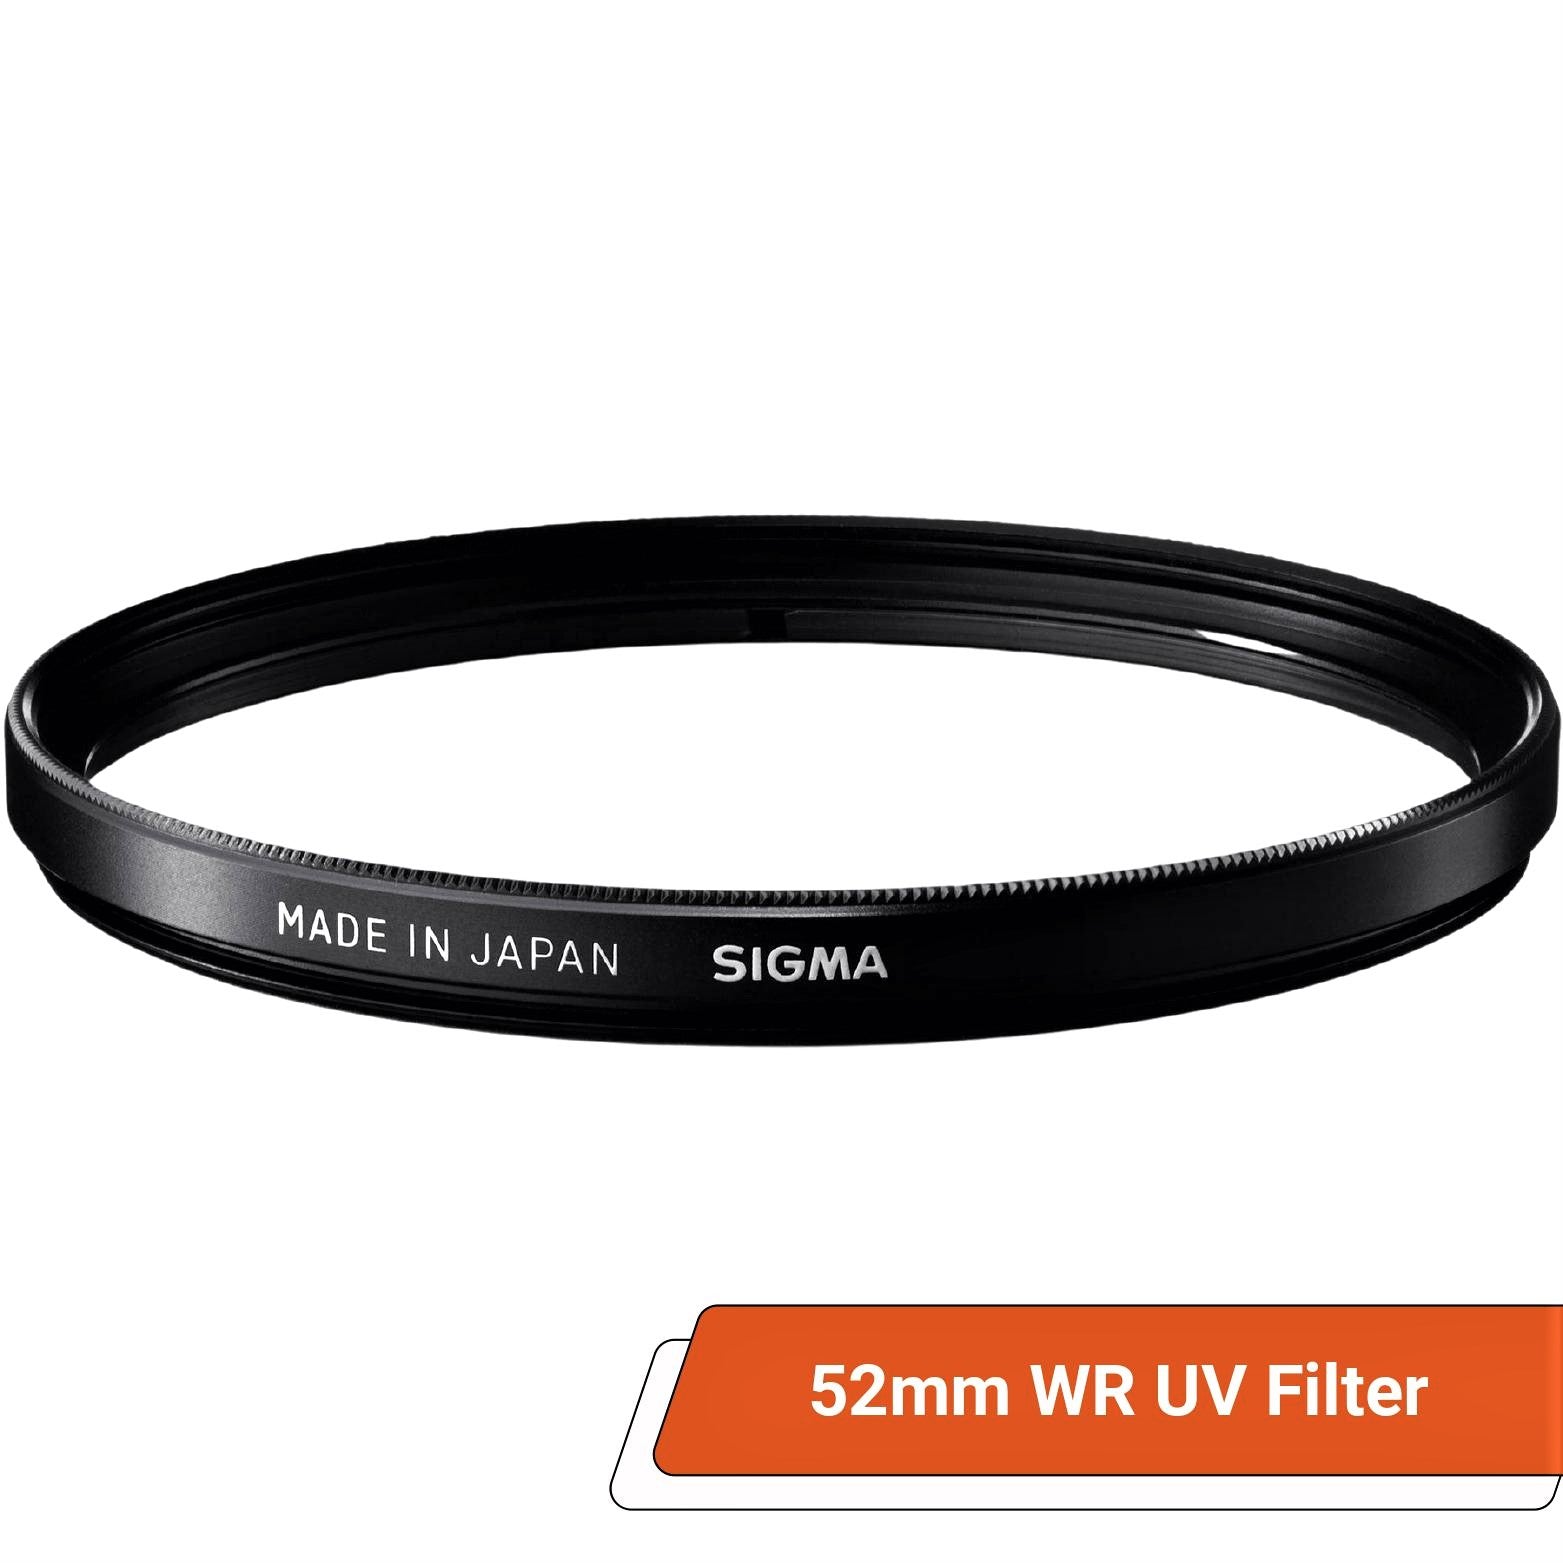 Sigma 52mm WR (Water Repellent) UV Filter